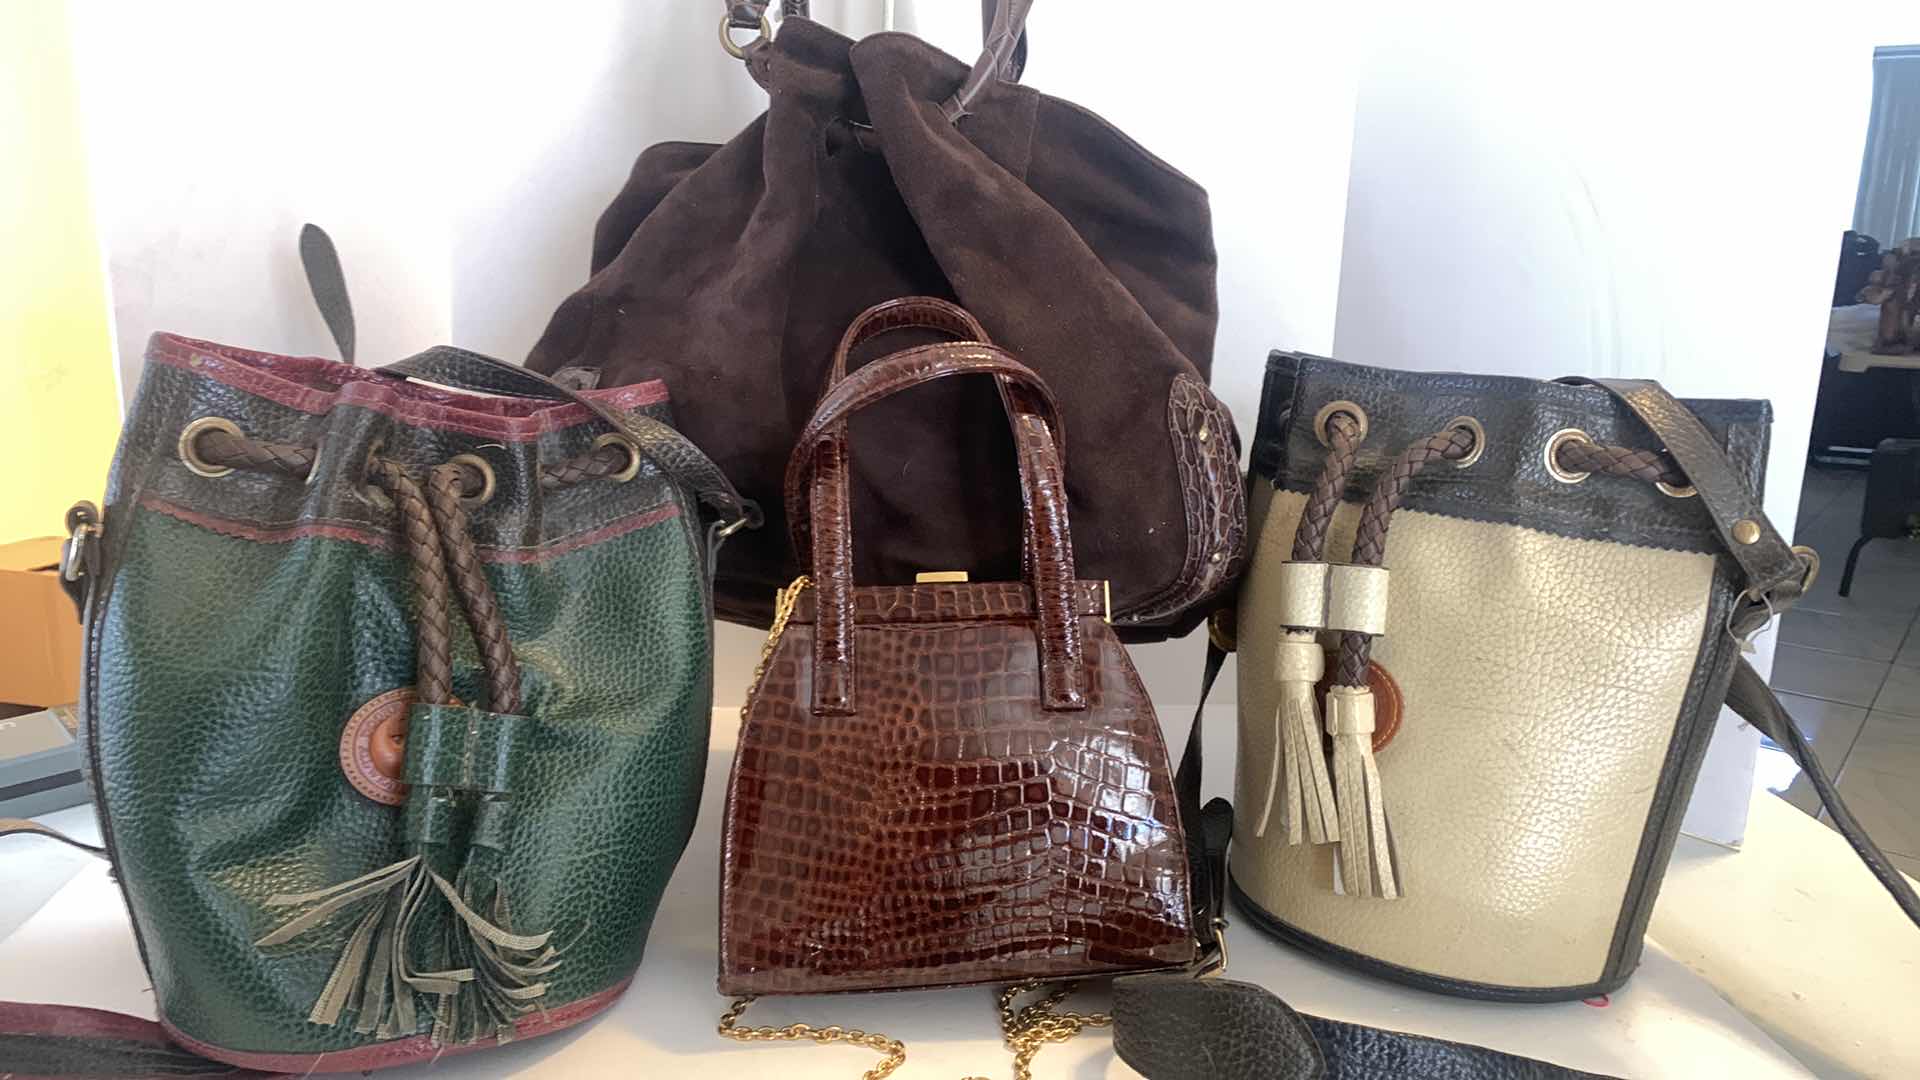 4 PURSES, DOONEY AND BOURKE, COLE HAAN, AND MORE